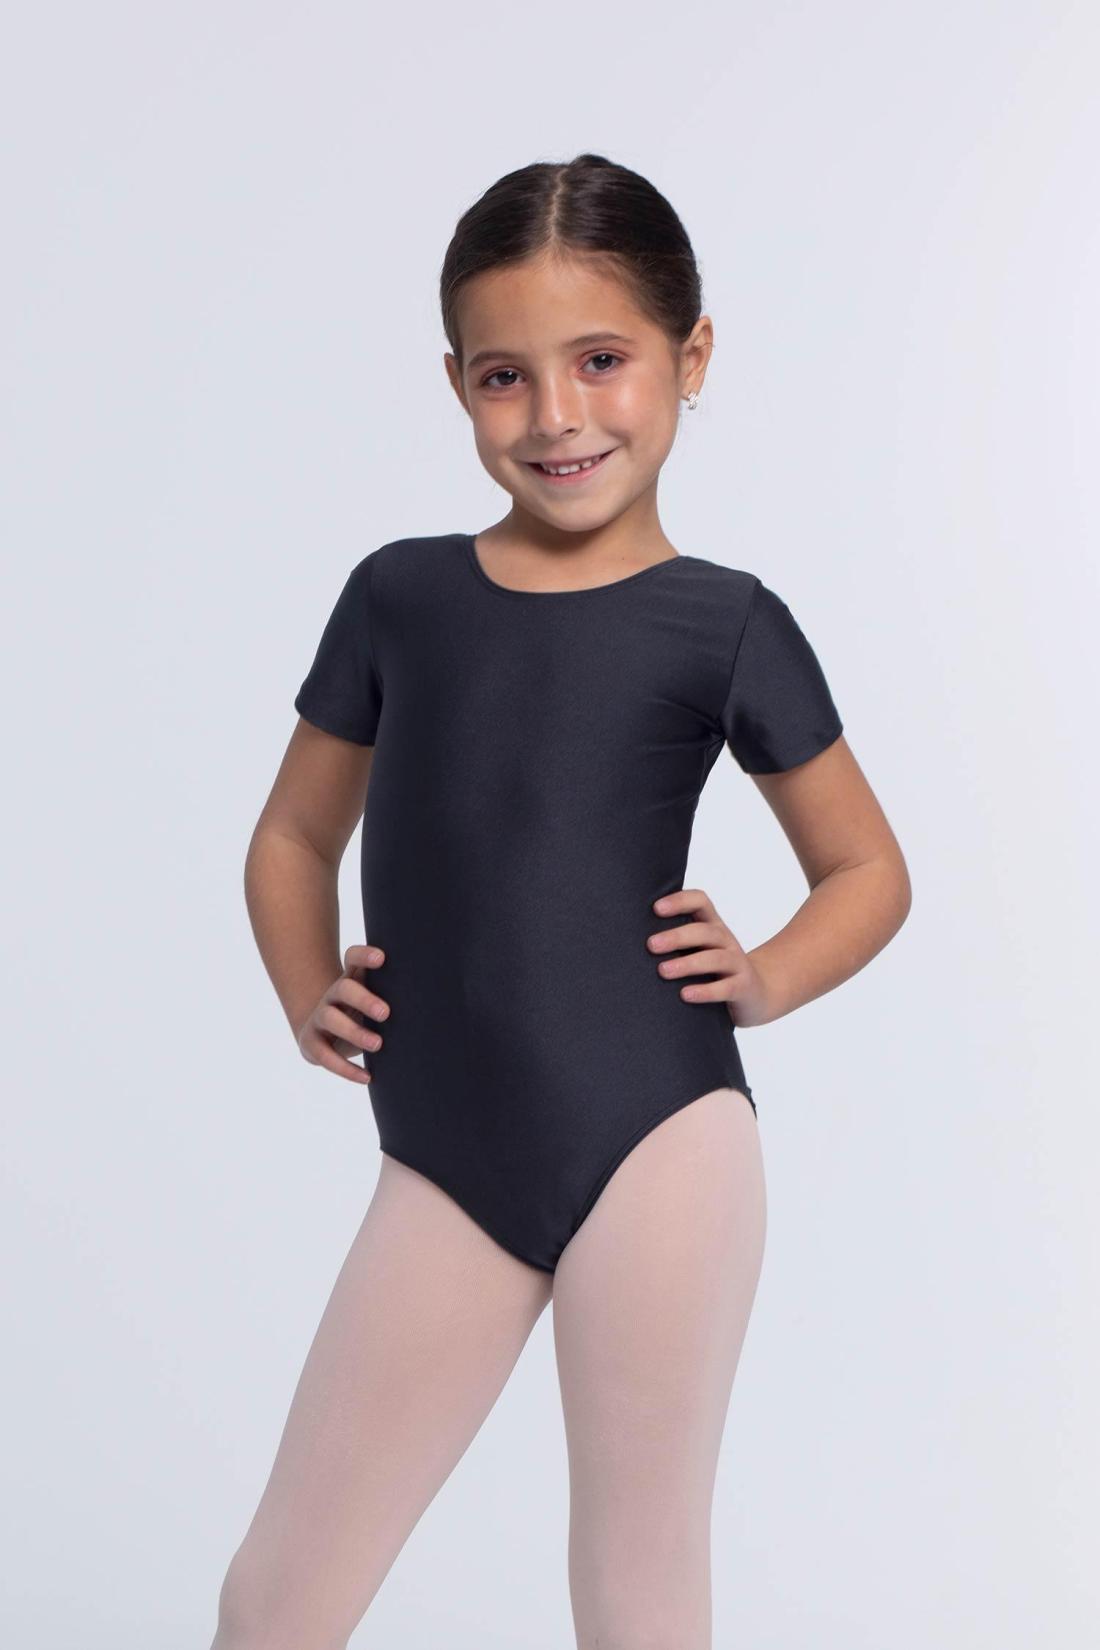 Retro Outfits and Womens Bodysuits for Dance Fashion